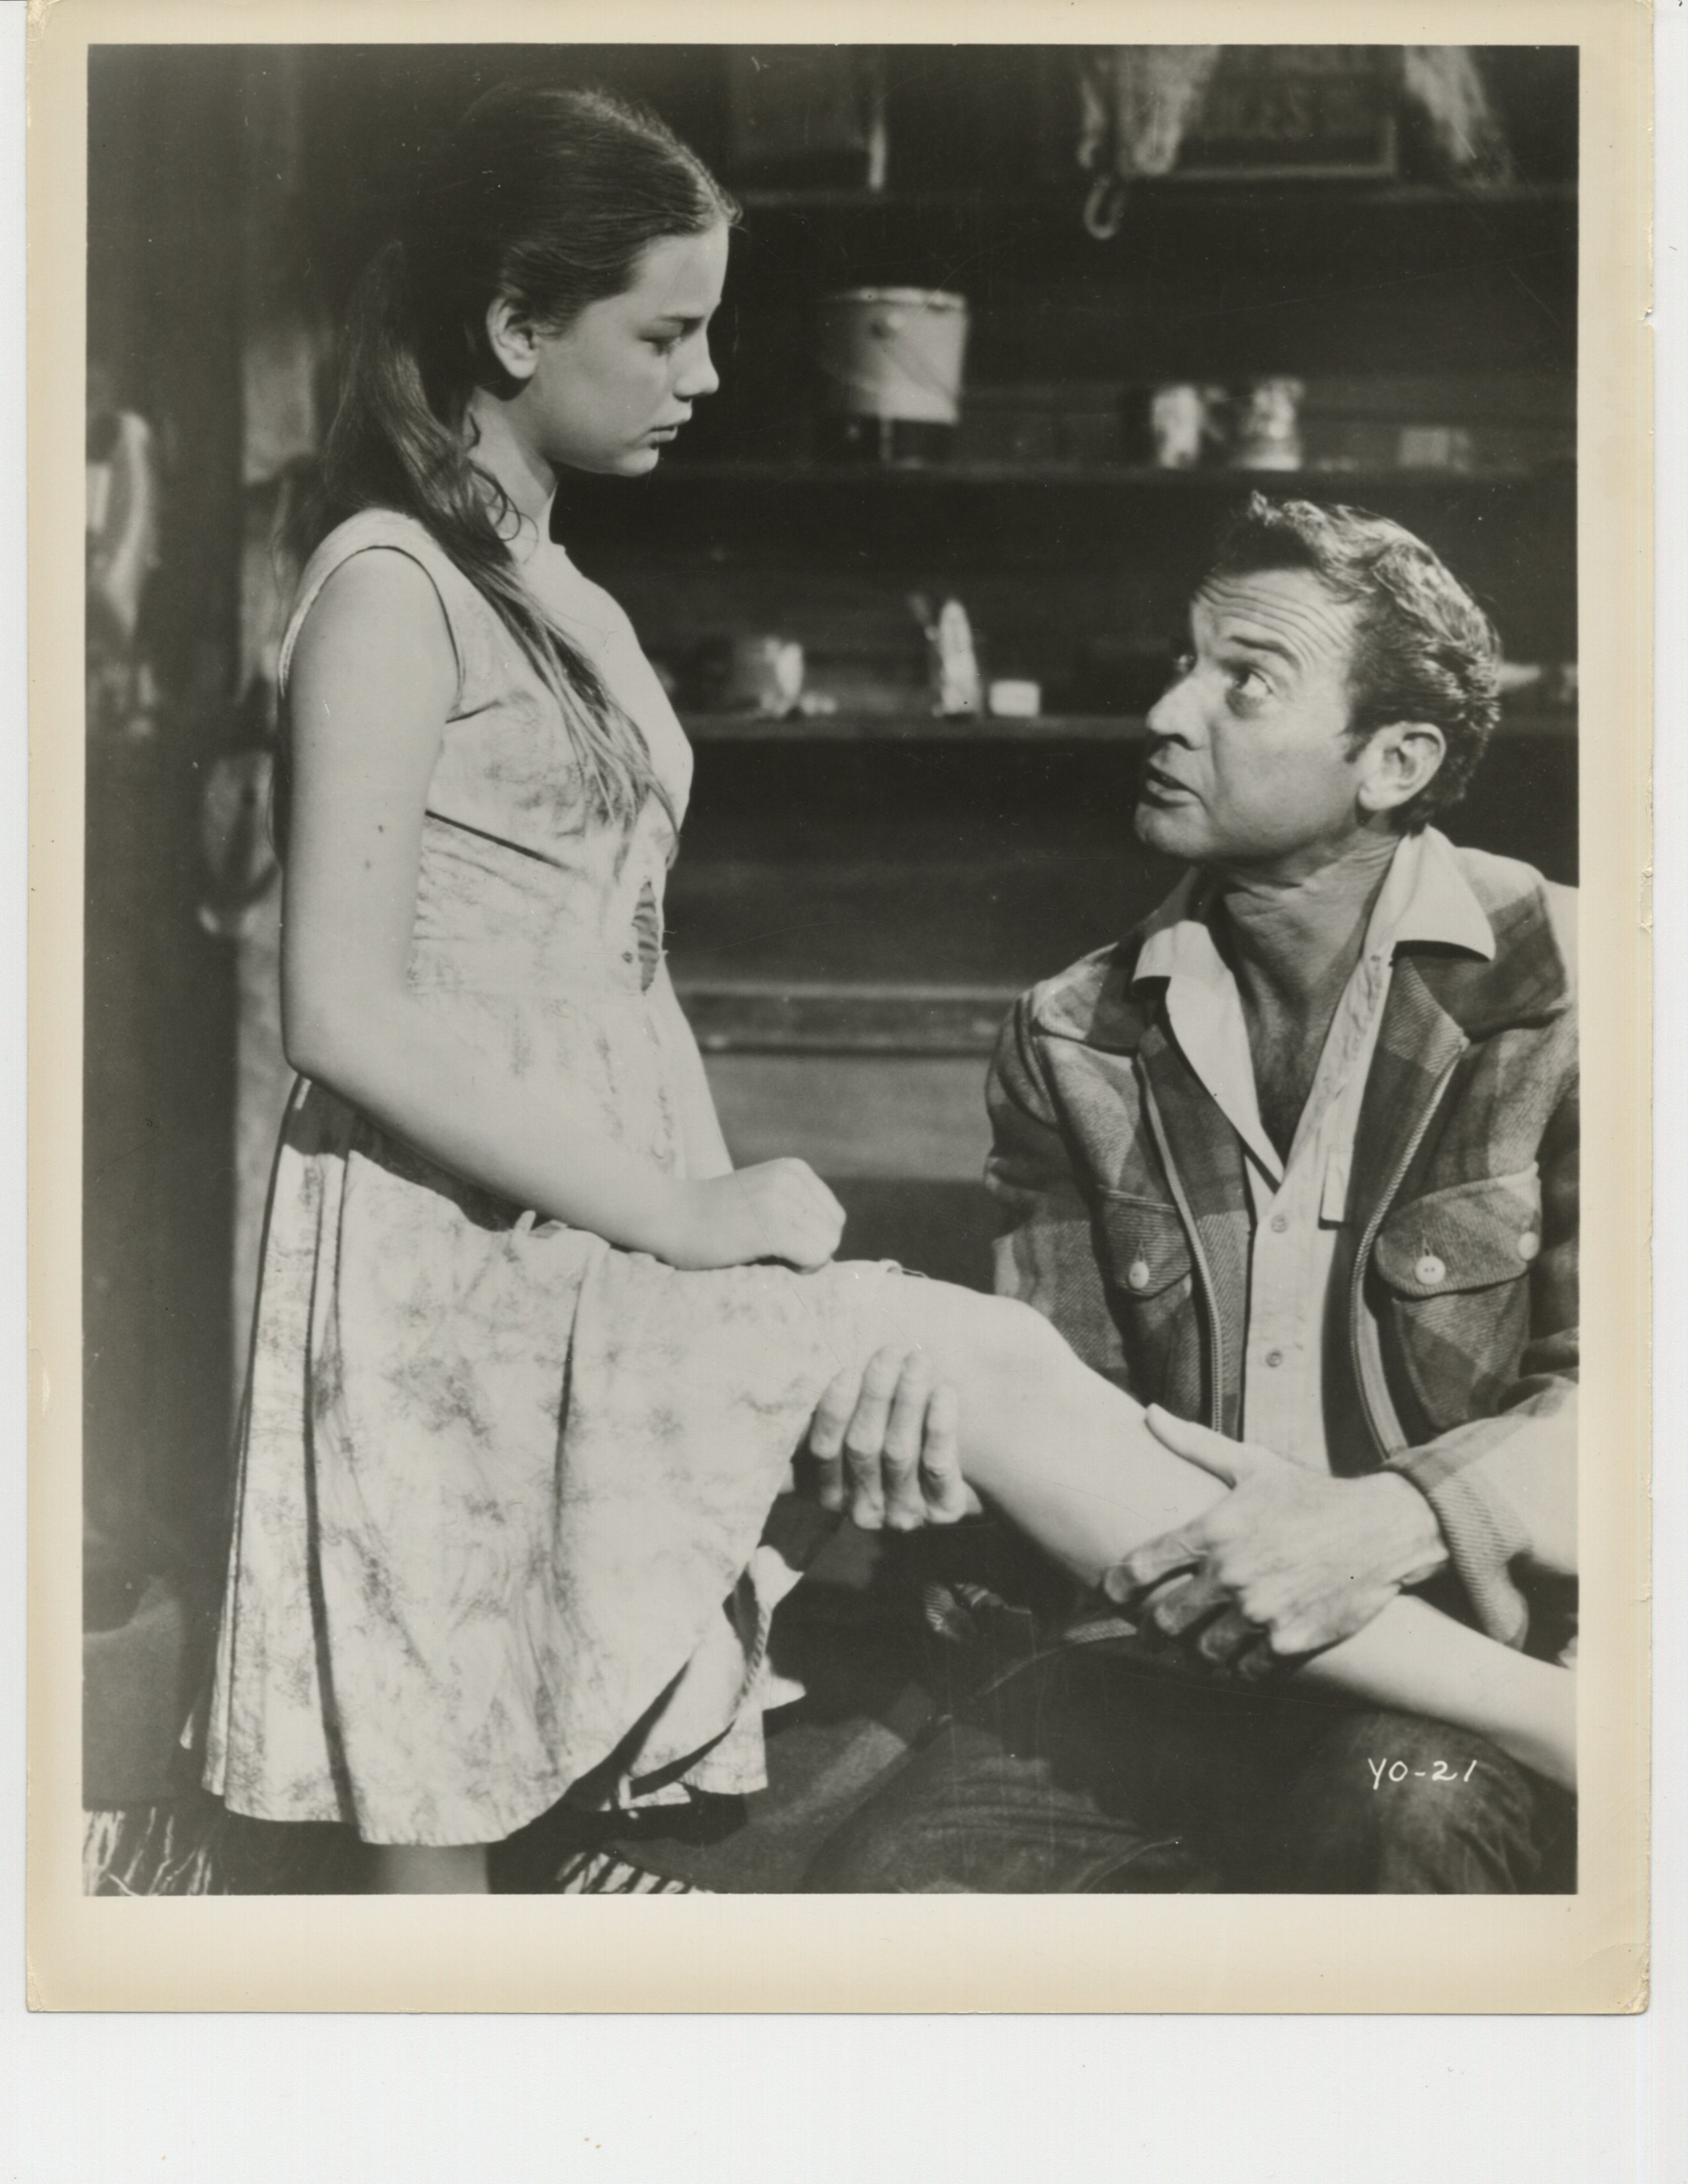 The Young One (1960) Screenshot 5